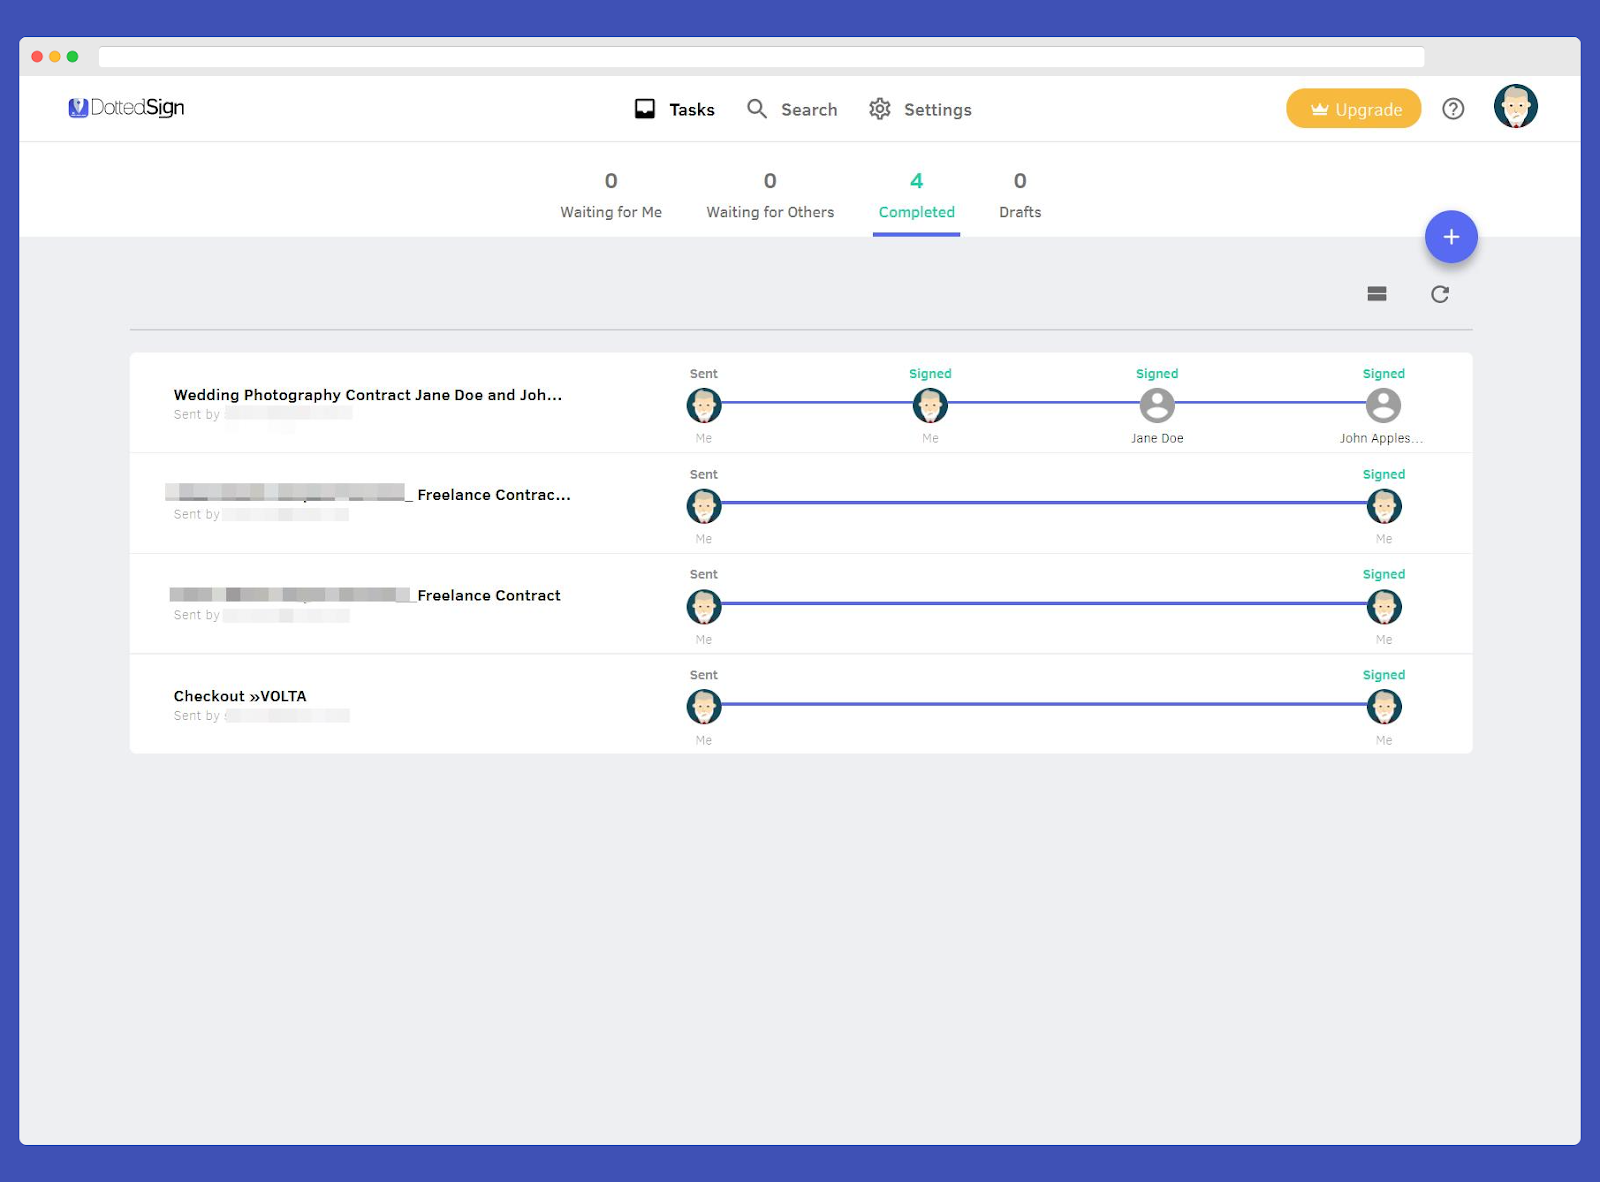 Have a constant view of tasks that have been completed on your DottedSign dashboard
